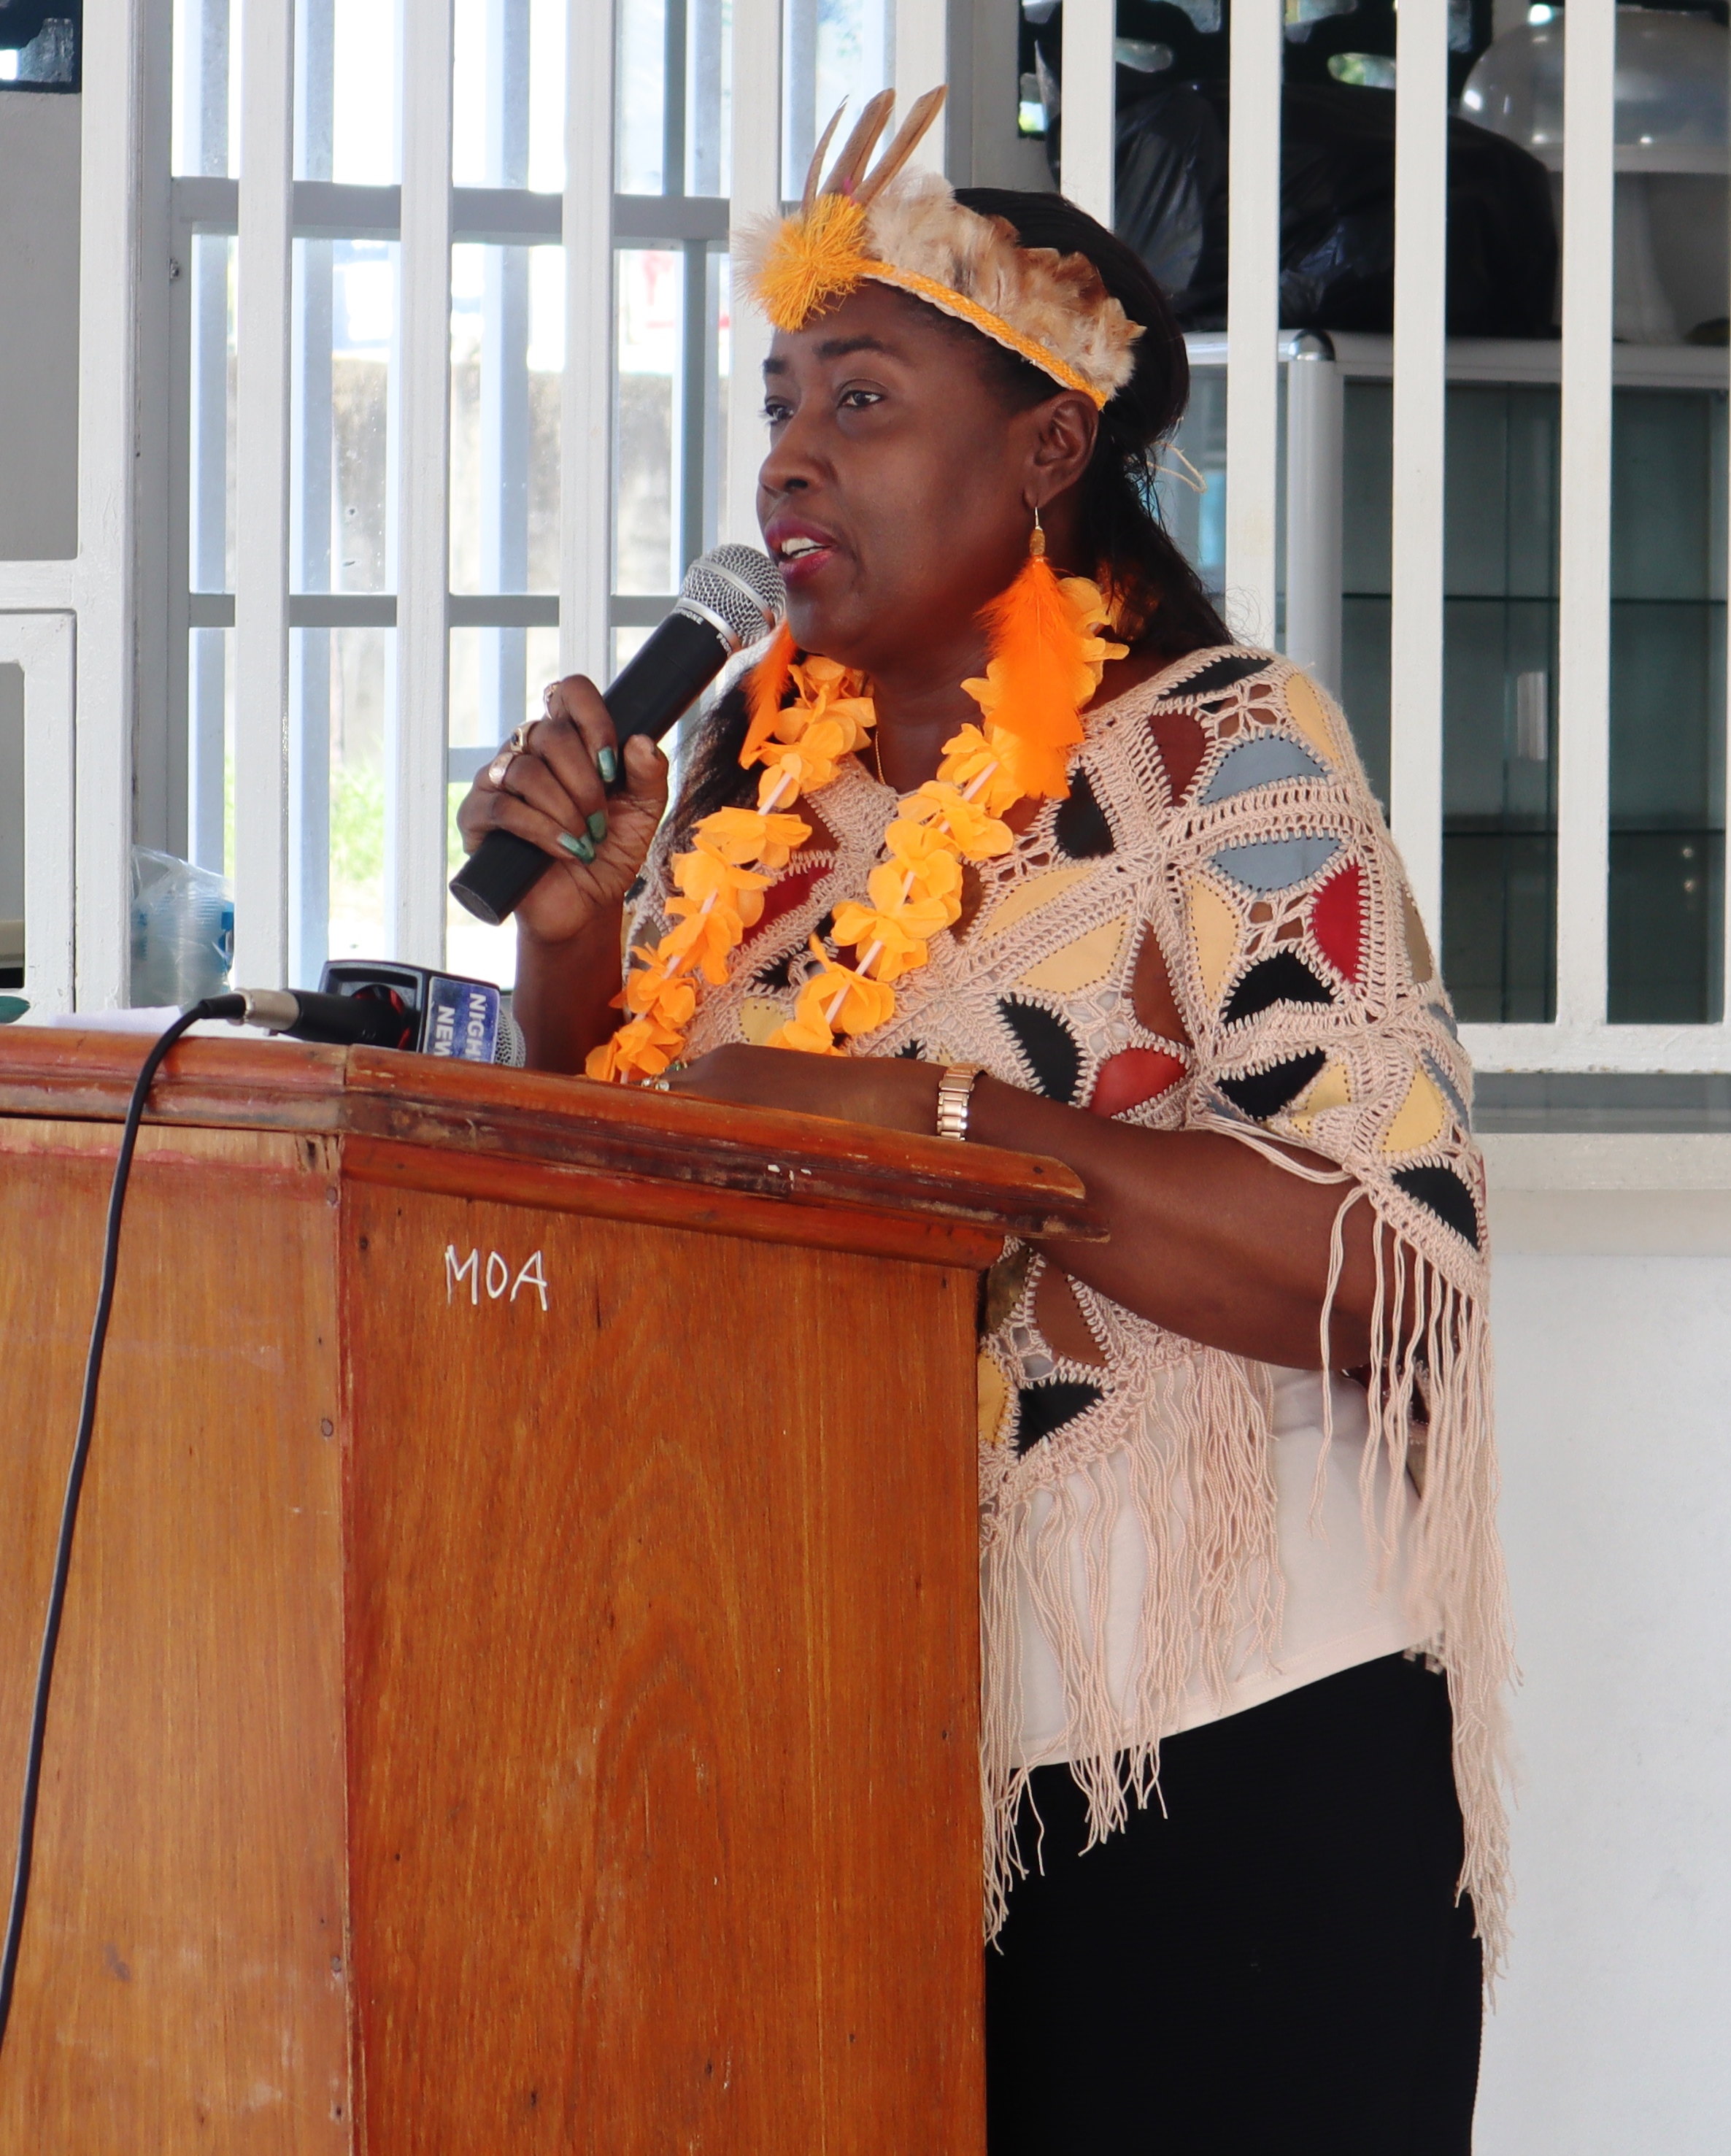 Minister Valerie Adams-Yearwood while delivering remarks